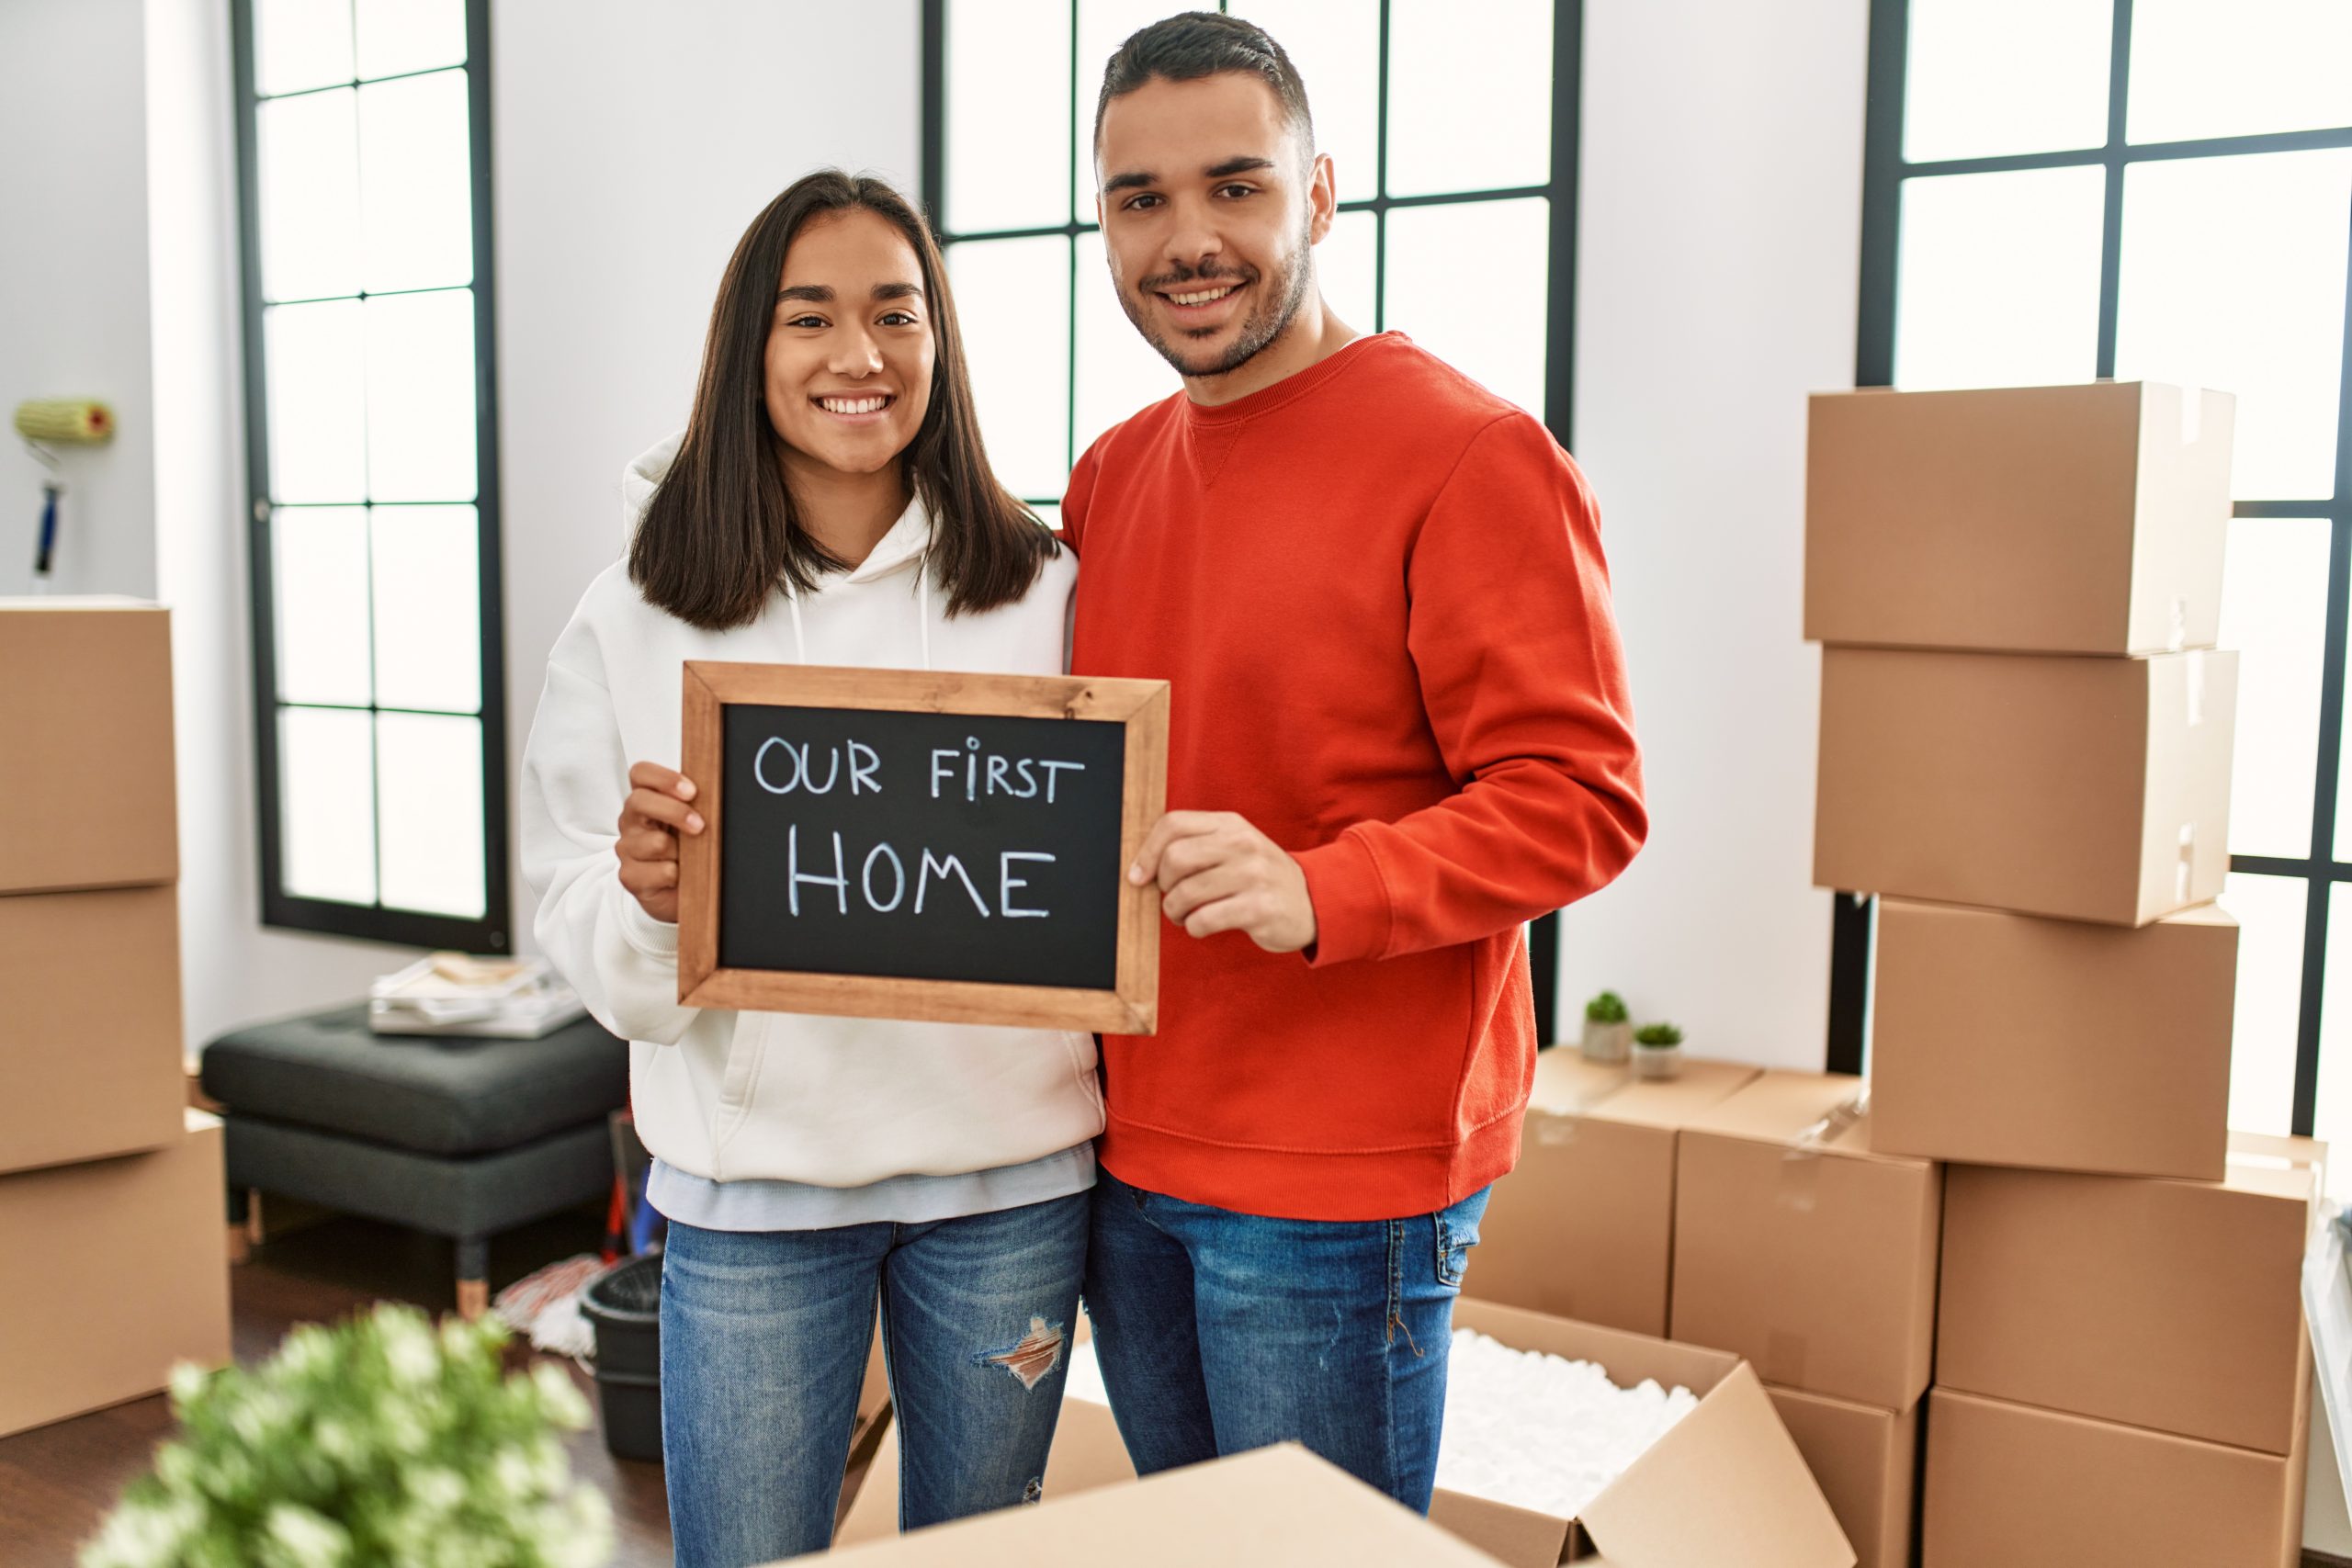 Why is AHMN The Best For First Time Home Buyers?